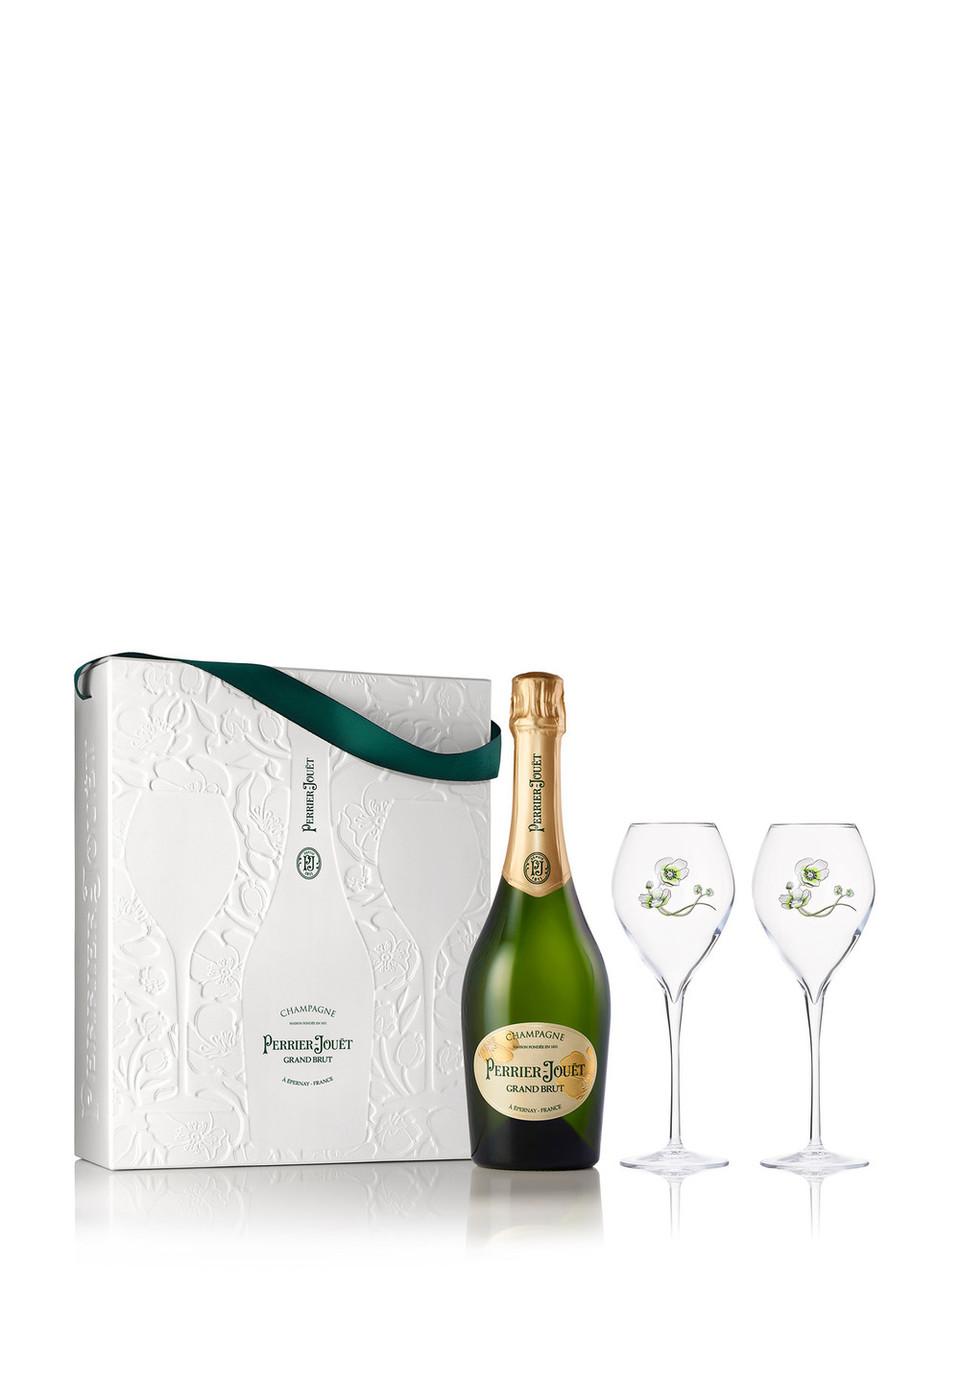 Perrier - Jouet Grand Brut with glass ペリエ ジュエ グラン 